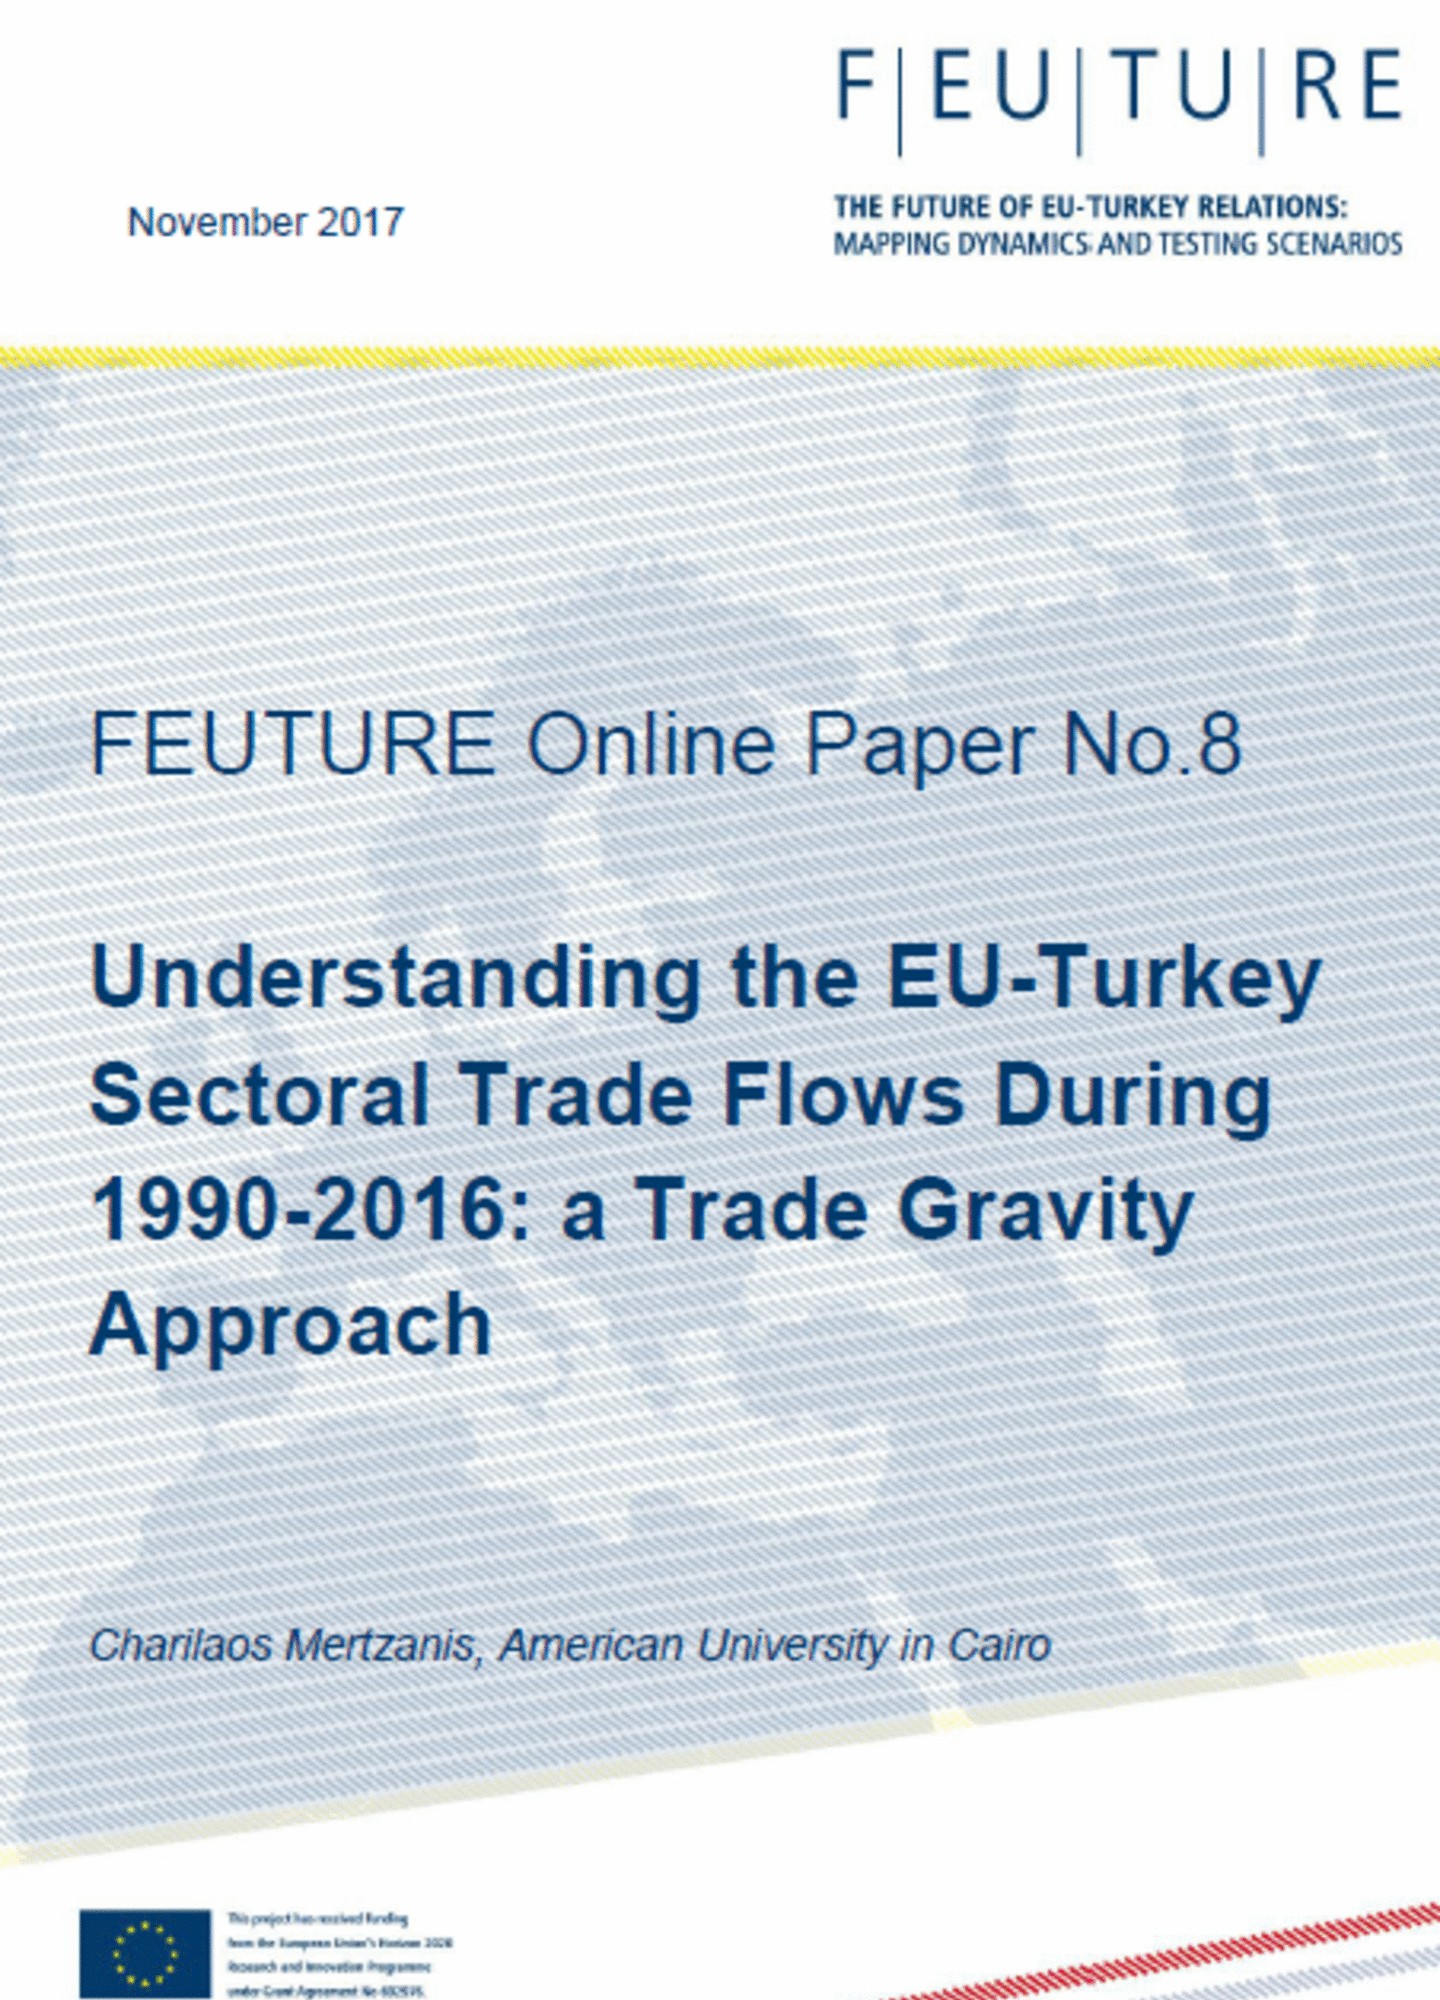 Understanding the EU-Turkey Sectoral Trade Flows During 1990-2016: a Trade Gravity Approach